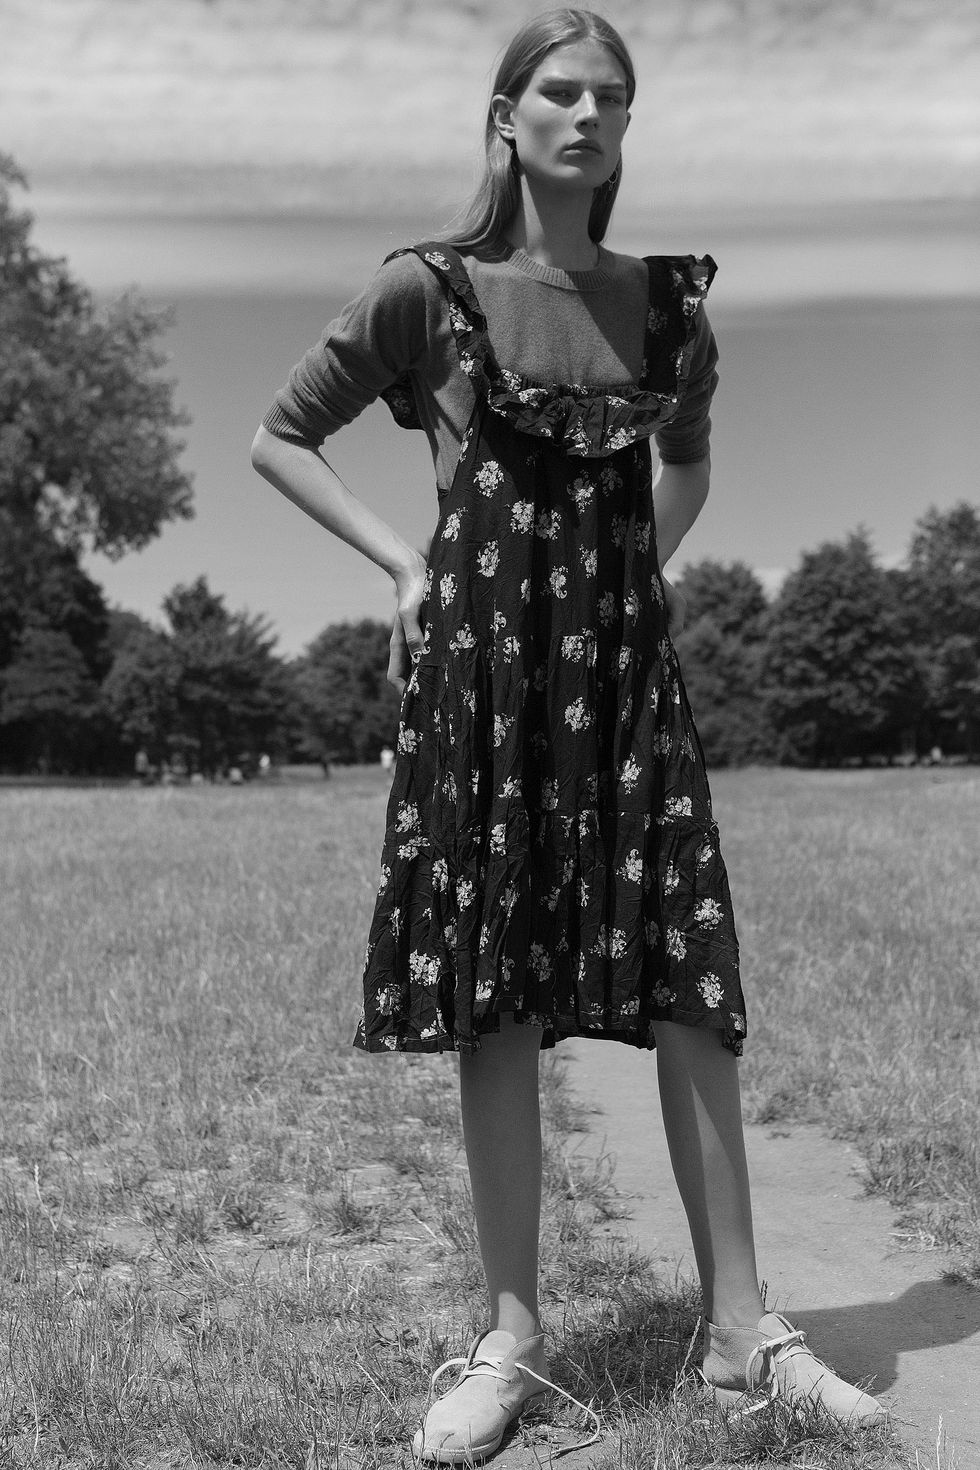 Photograph, Clothing, Retro style, Standing, Dress, Beauty, Black-and-white, Vintage clothing, Fashion, Photography, 